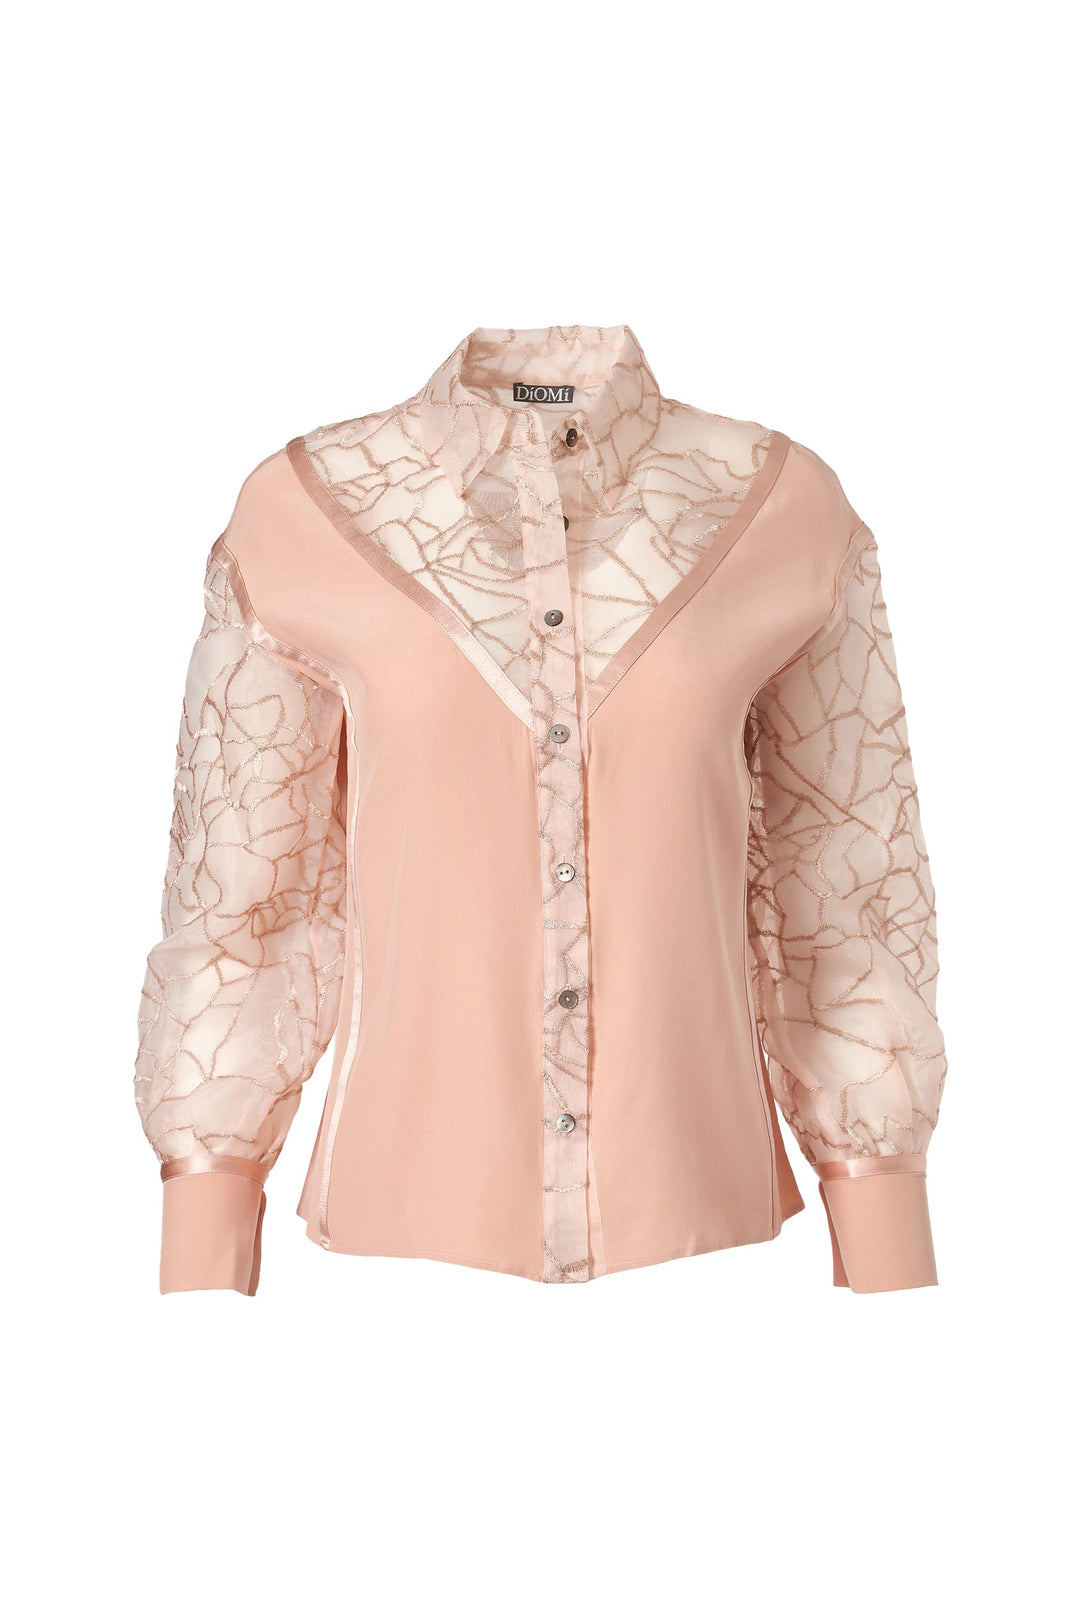 Drop Shoulder Bubble Blouse in Rosy Pink